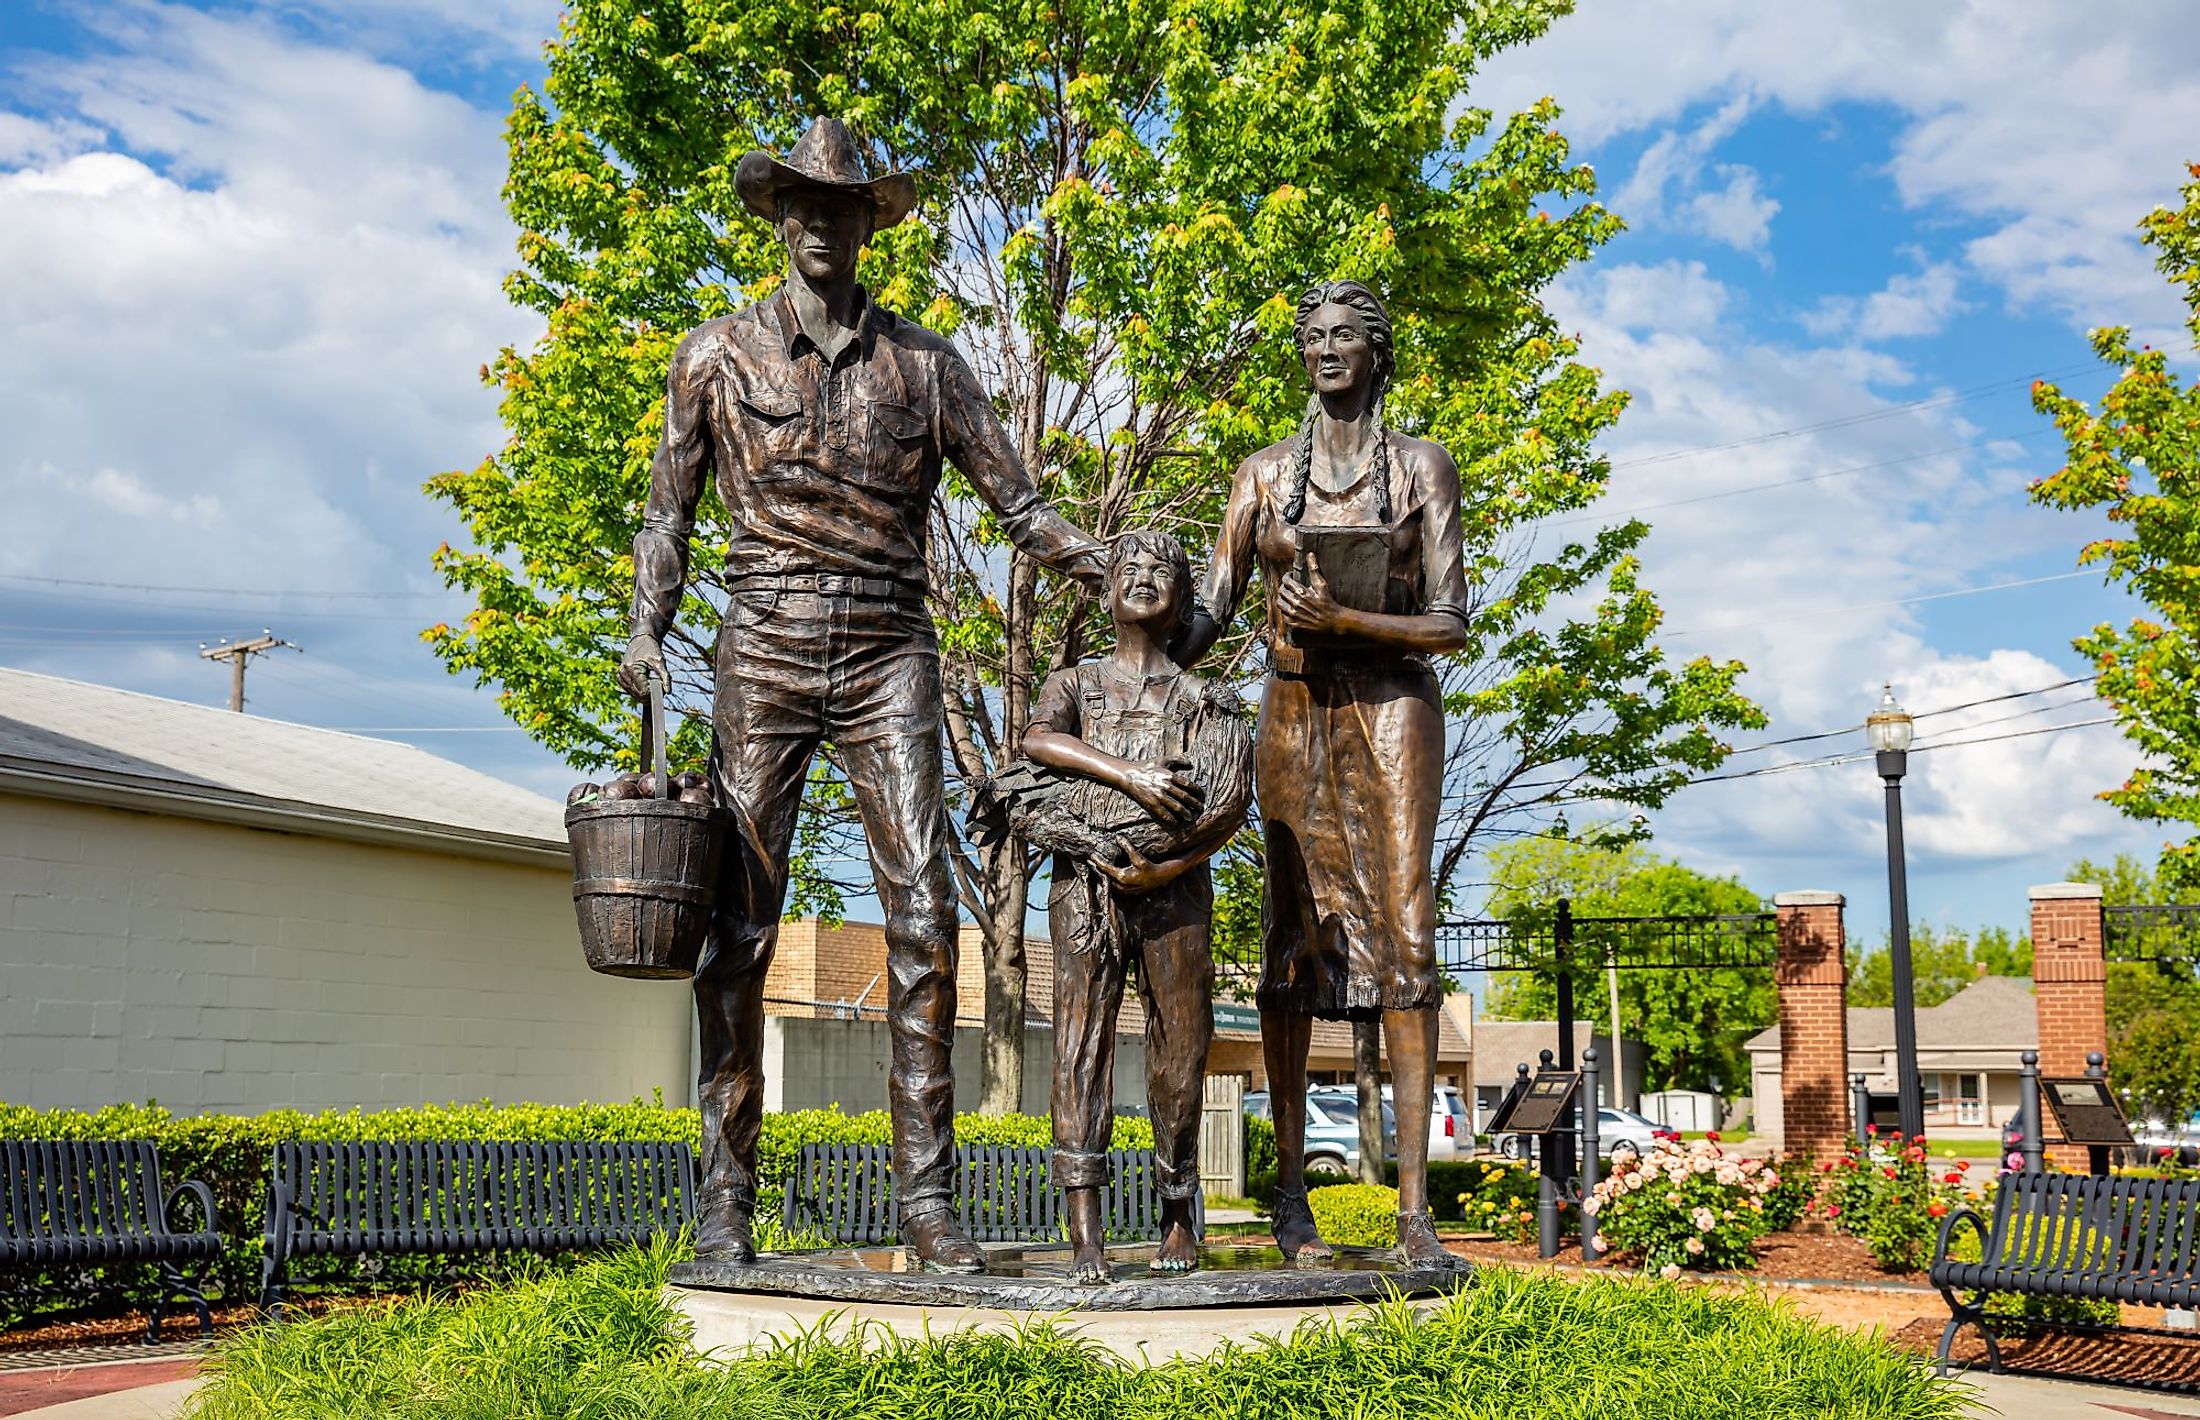 Bronze statue of an early 20th century agriculture family at Centennial Park on Main Street in Broken Arrow, Tulsa, Oklahoma. Editorial credit: rawf8 / Shutterstock.com